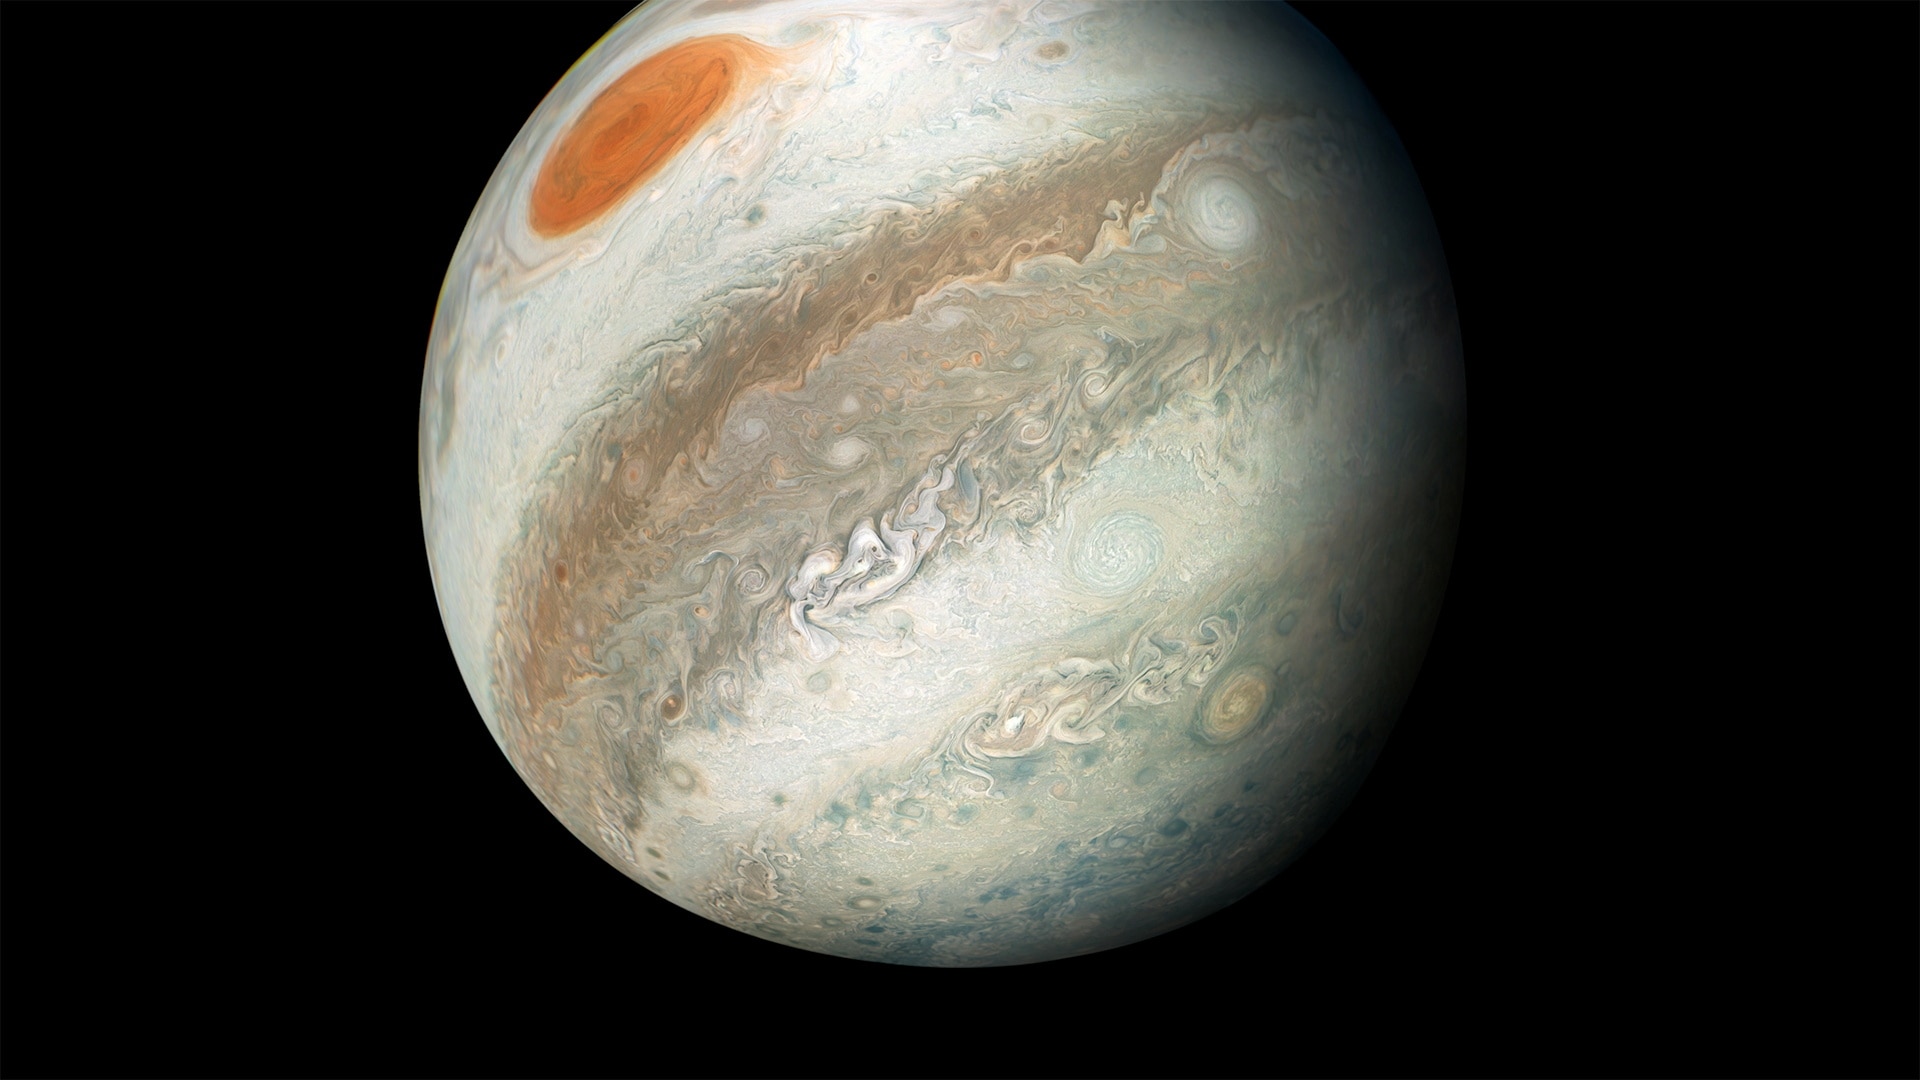 The image was captured by the telescope's Near Infrared Camera (NIRCam) instrument on July 27, which highlighted the planet's unique features. The image highlights the planet's massive storm, the Great Red Spot, as well as bands in the atmosphere of the planet. The image as well as the observations made by the JWST telescope are designed to help scientists understand the atmosphere and planet's thermal structure and layers to study phenomena like winds and auroras.